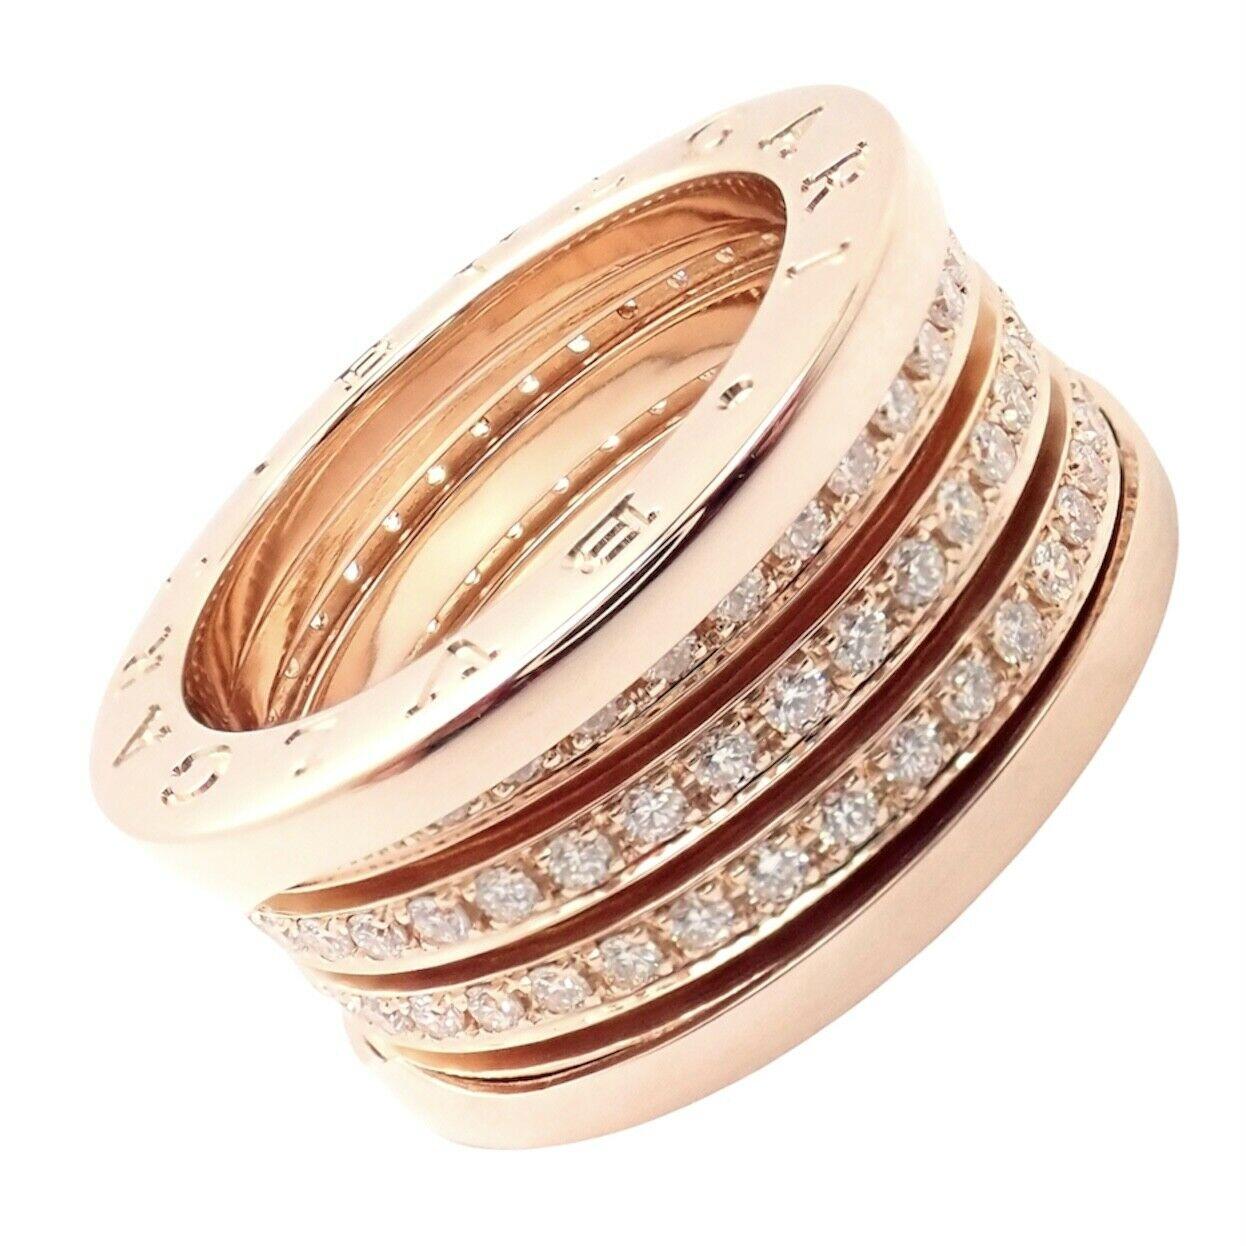 18k Rose Gold Pave Diamond B-Zero Three Band Ring by Bulgari. 
With Round brilliant cut diamonds VVS1 clarity, E color
Details:
Size: European 54, US 6.75
Weight: 15 grams
Width: 10mm
Stamped Hallmarks: Bvlgari 750 Made in Italy 54
*Free Shipping